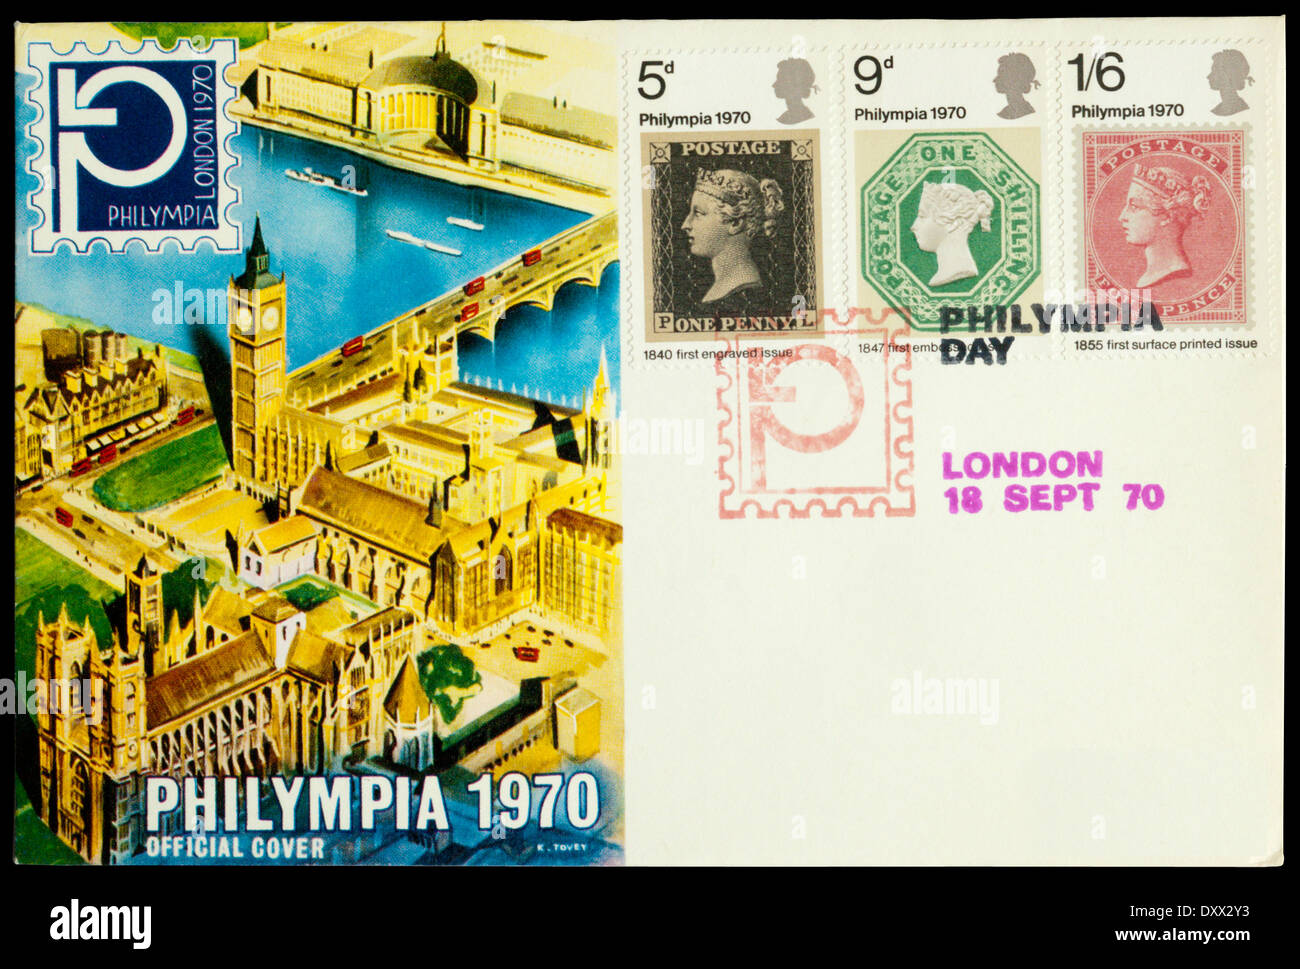 An Official Cover to celebrate the Philympia 1970 International Stamp Exhibition. The stamps were designed by David Gentleman. Stock Photo